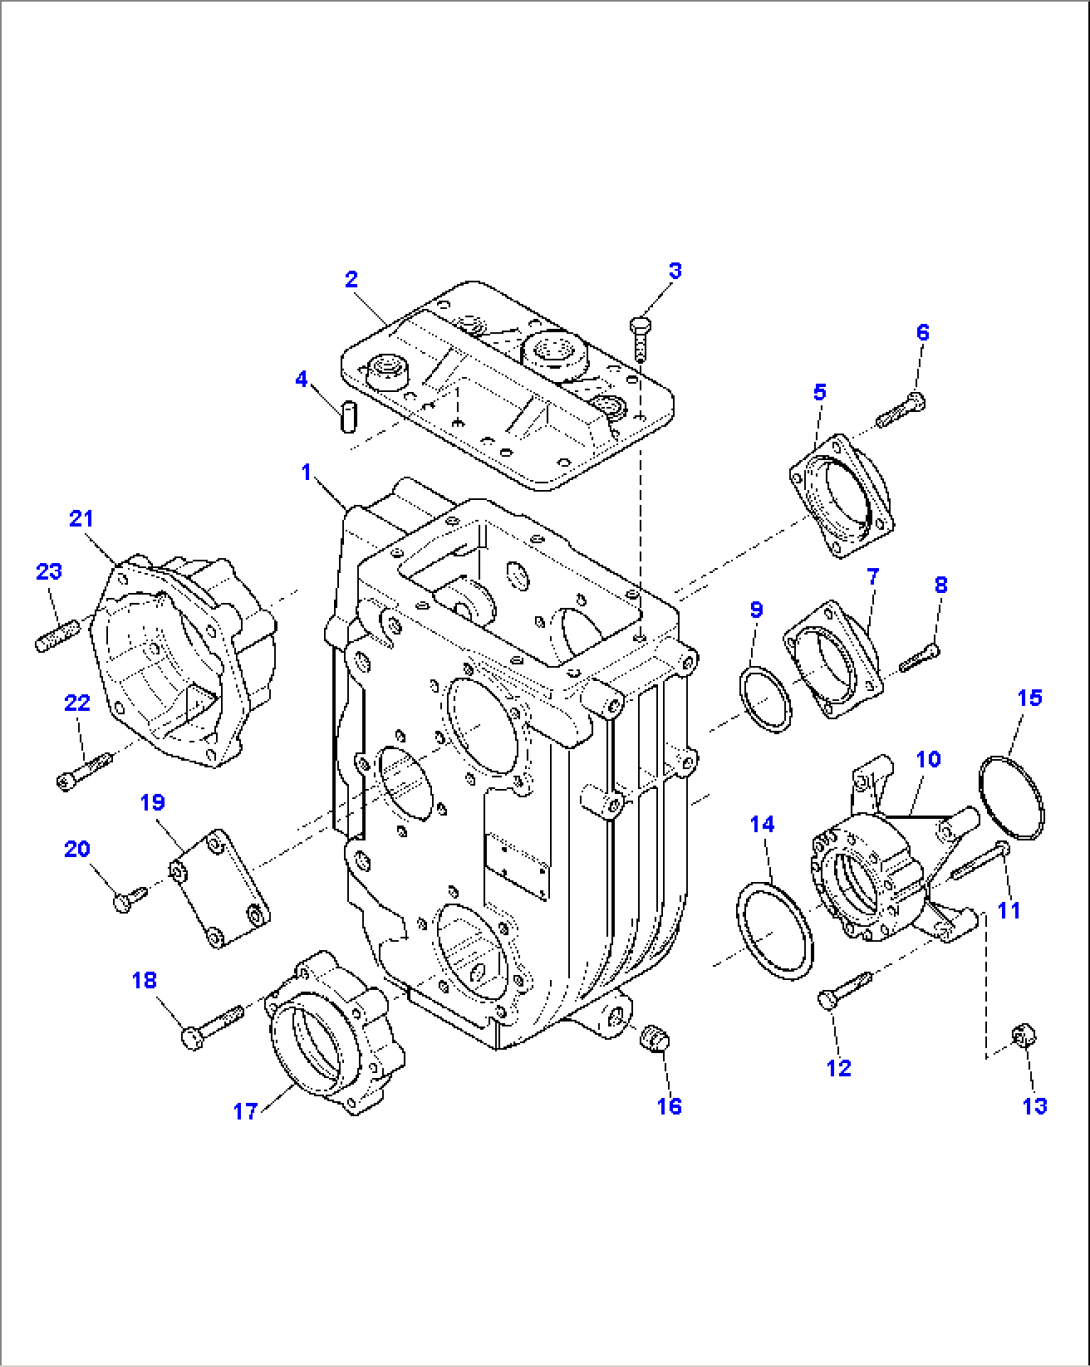 FRONT AXLE (1/9)